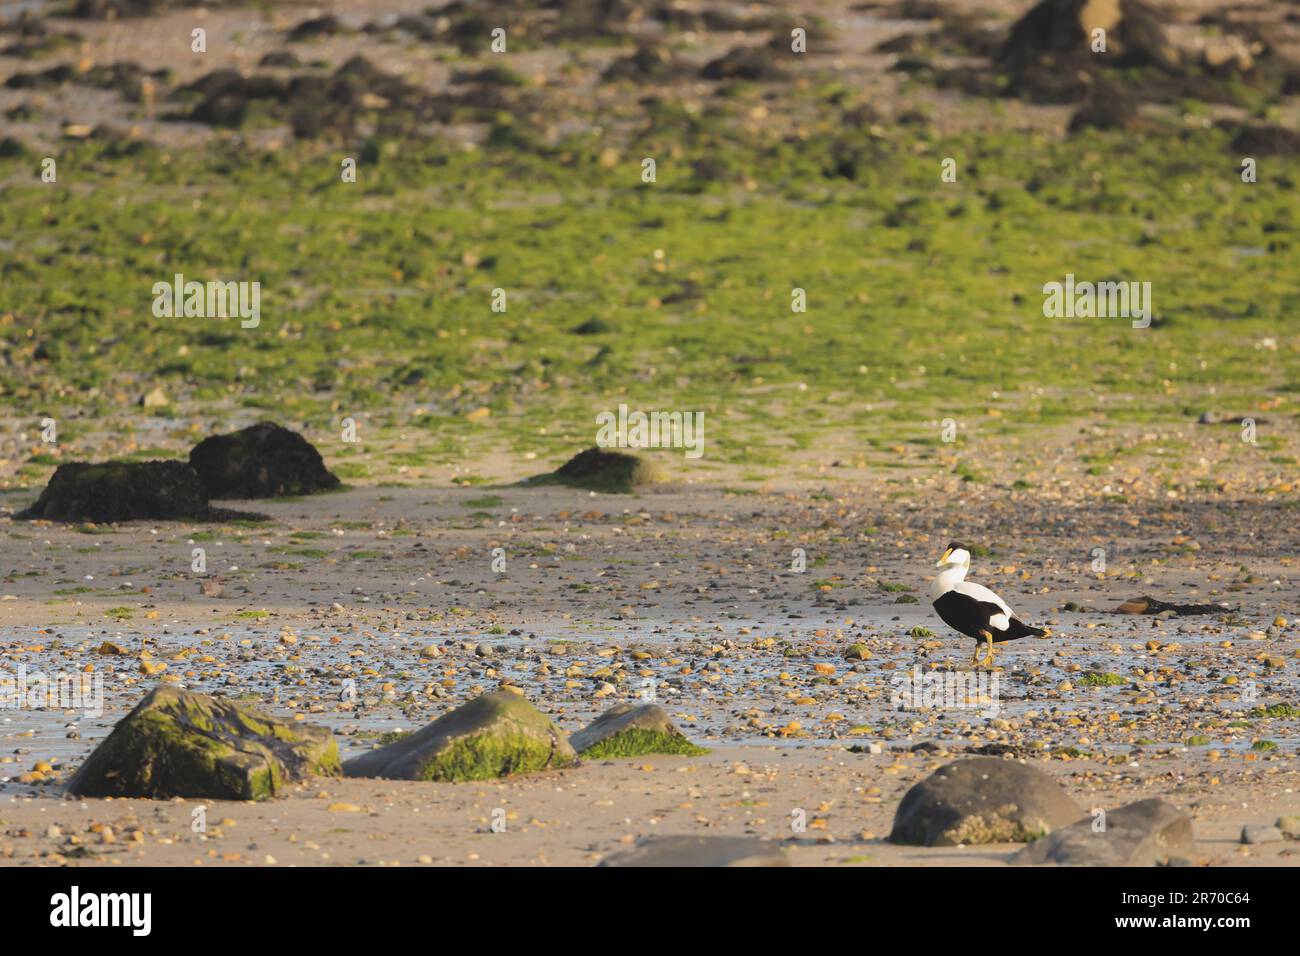 A common Eider (Somateria mollissima) seabird or sea duck on a rocky seaside beach at low tide in Aberdour on the Firth of Forth in Fife, Scotland, UK Stock Photo